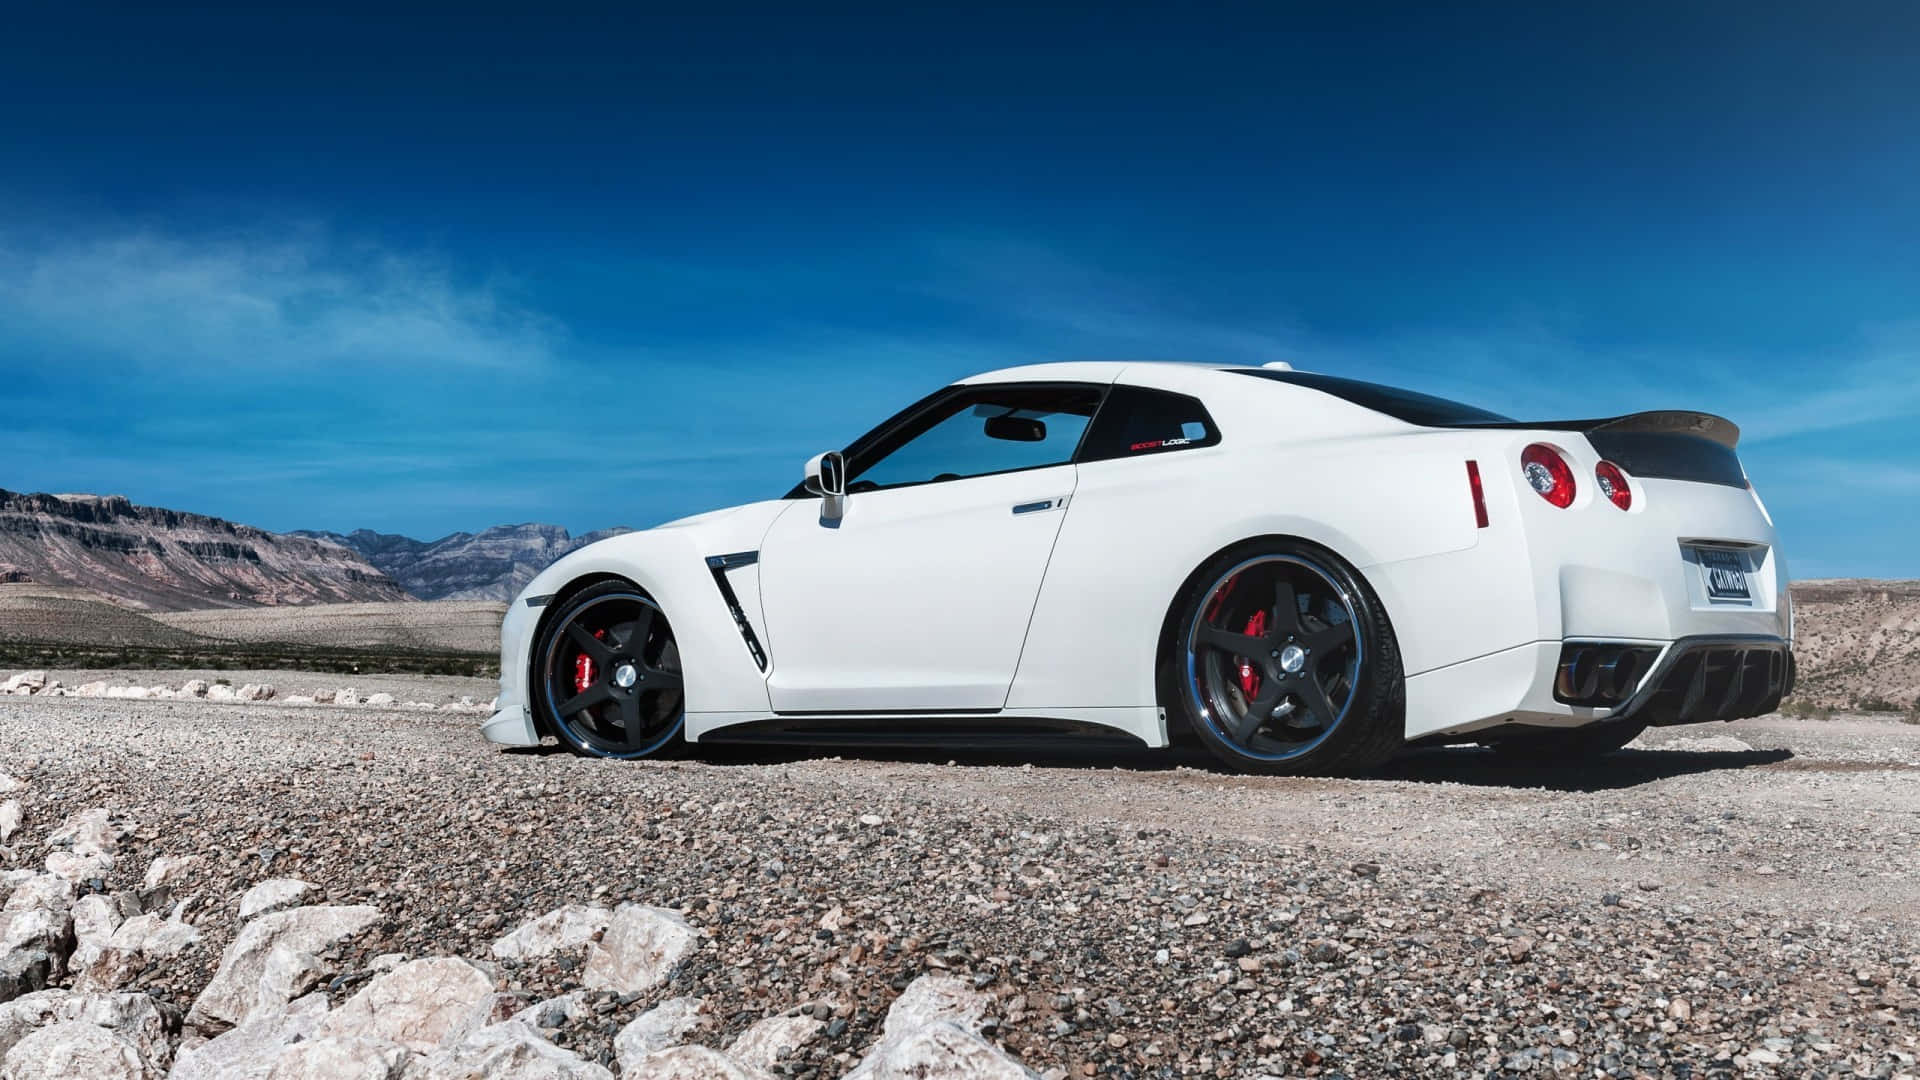 The GT-R: Majesty and Power